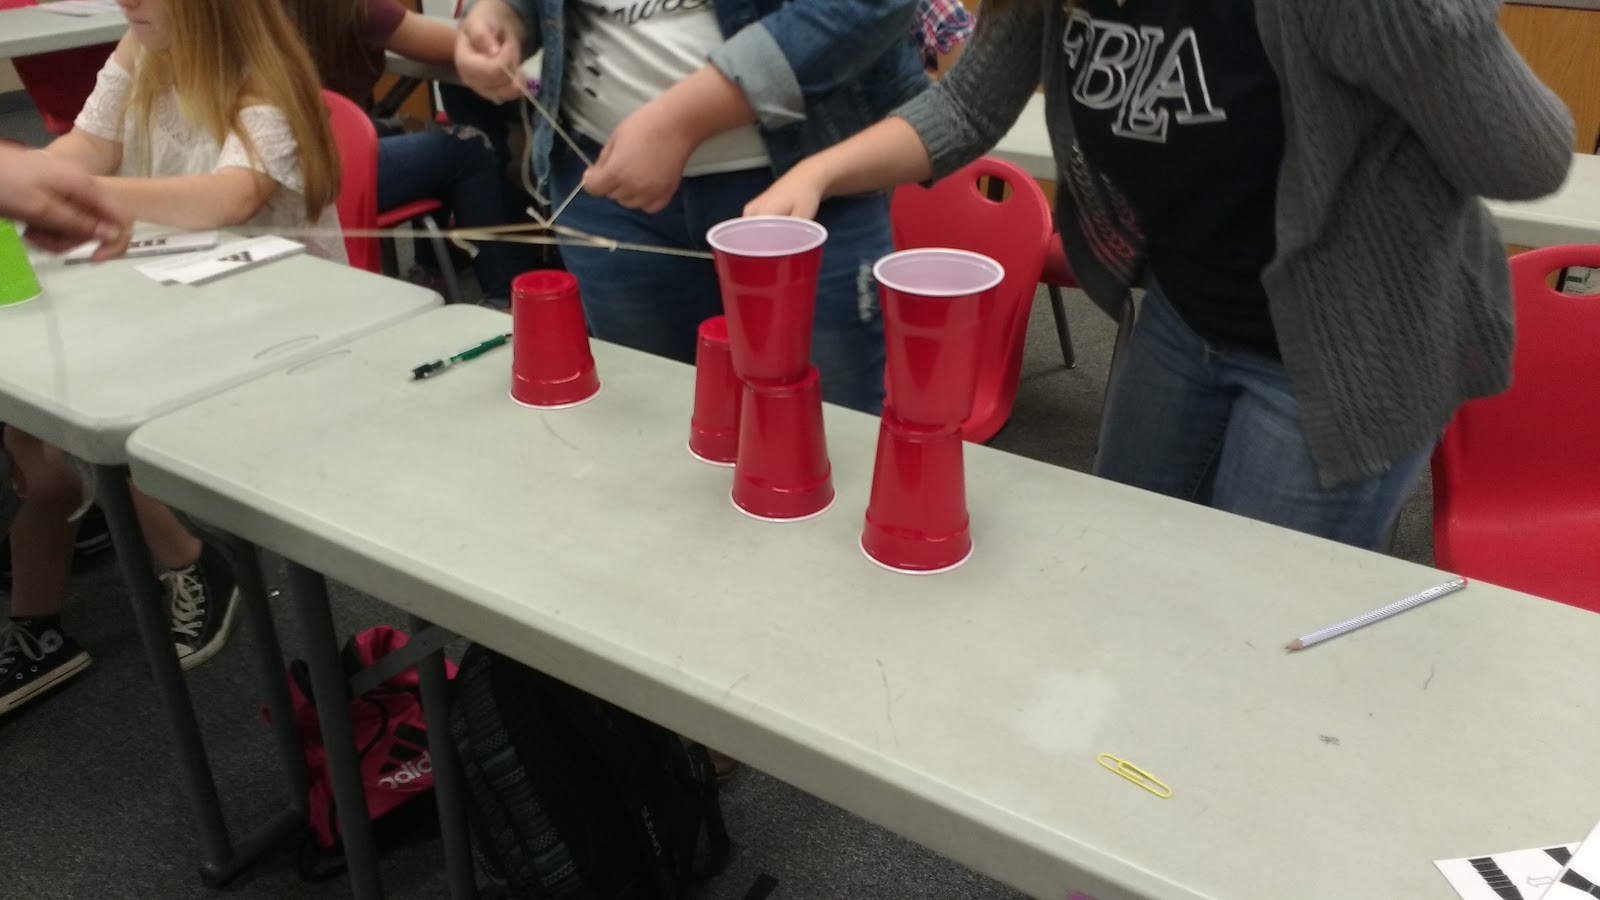 high school students participating in cup stacking challenge as a team building activity during the first week of school 